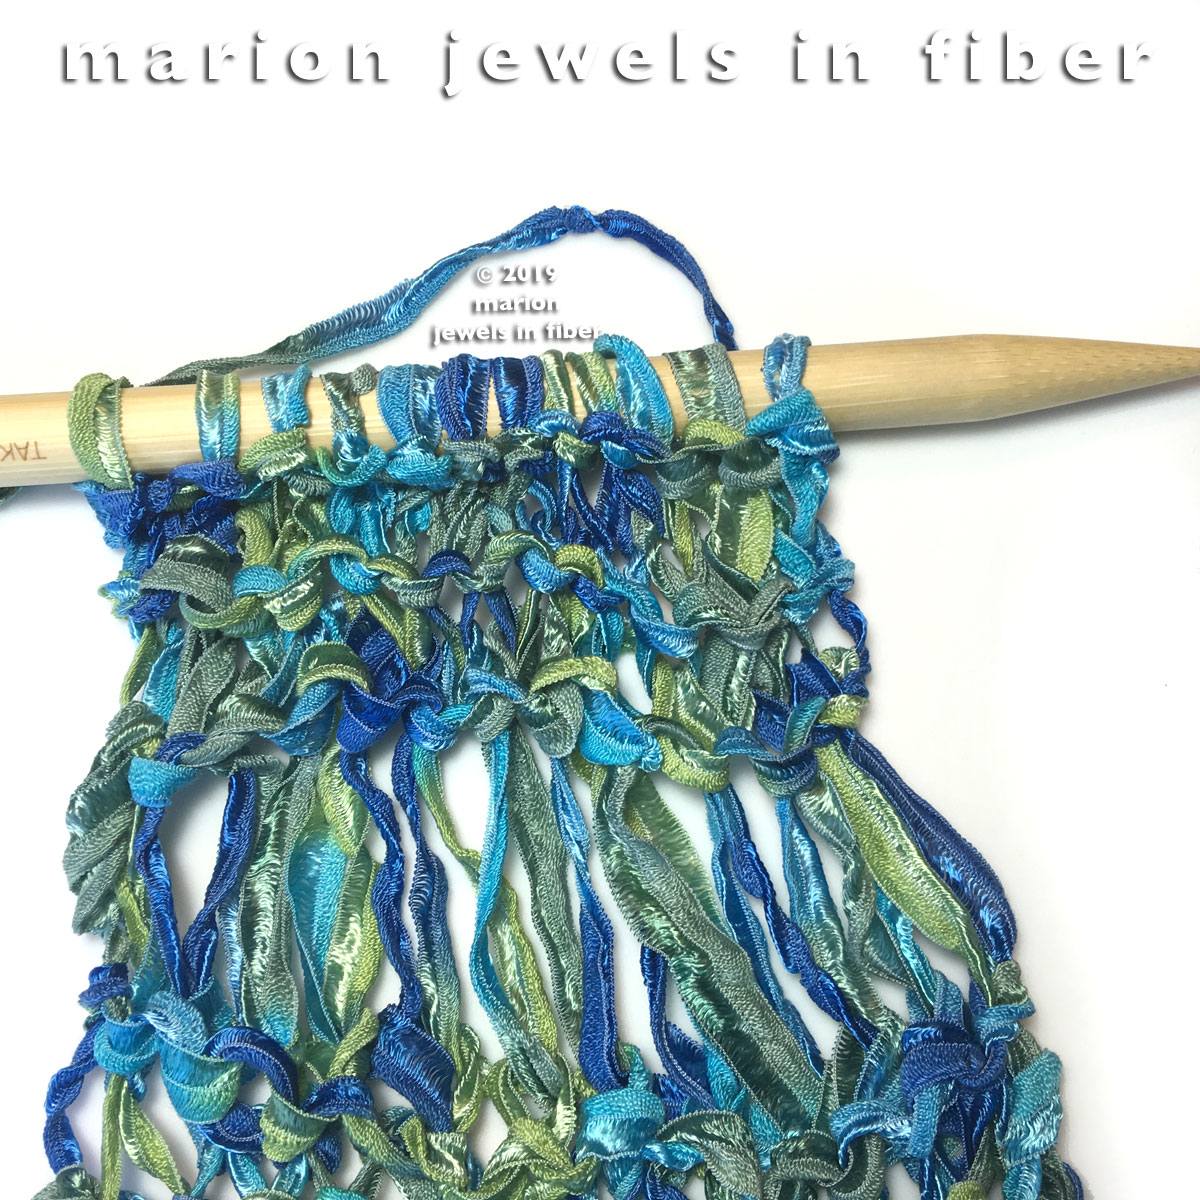 Marion Jewels in Fiber - News and Such: DIY Silk Tassels for Jewelry